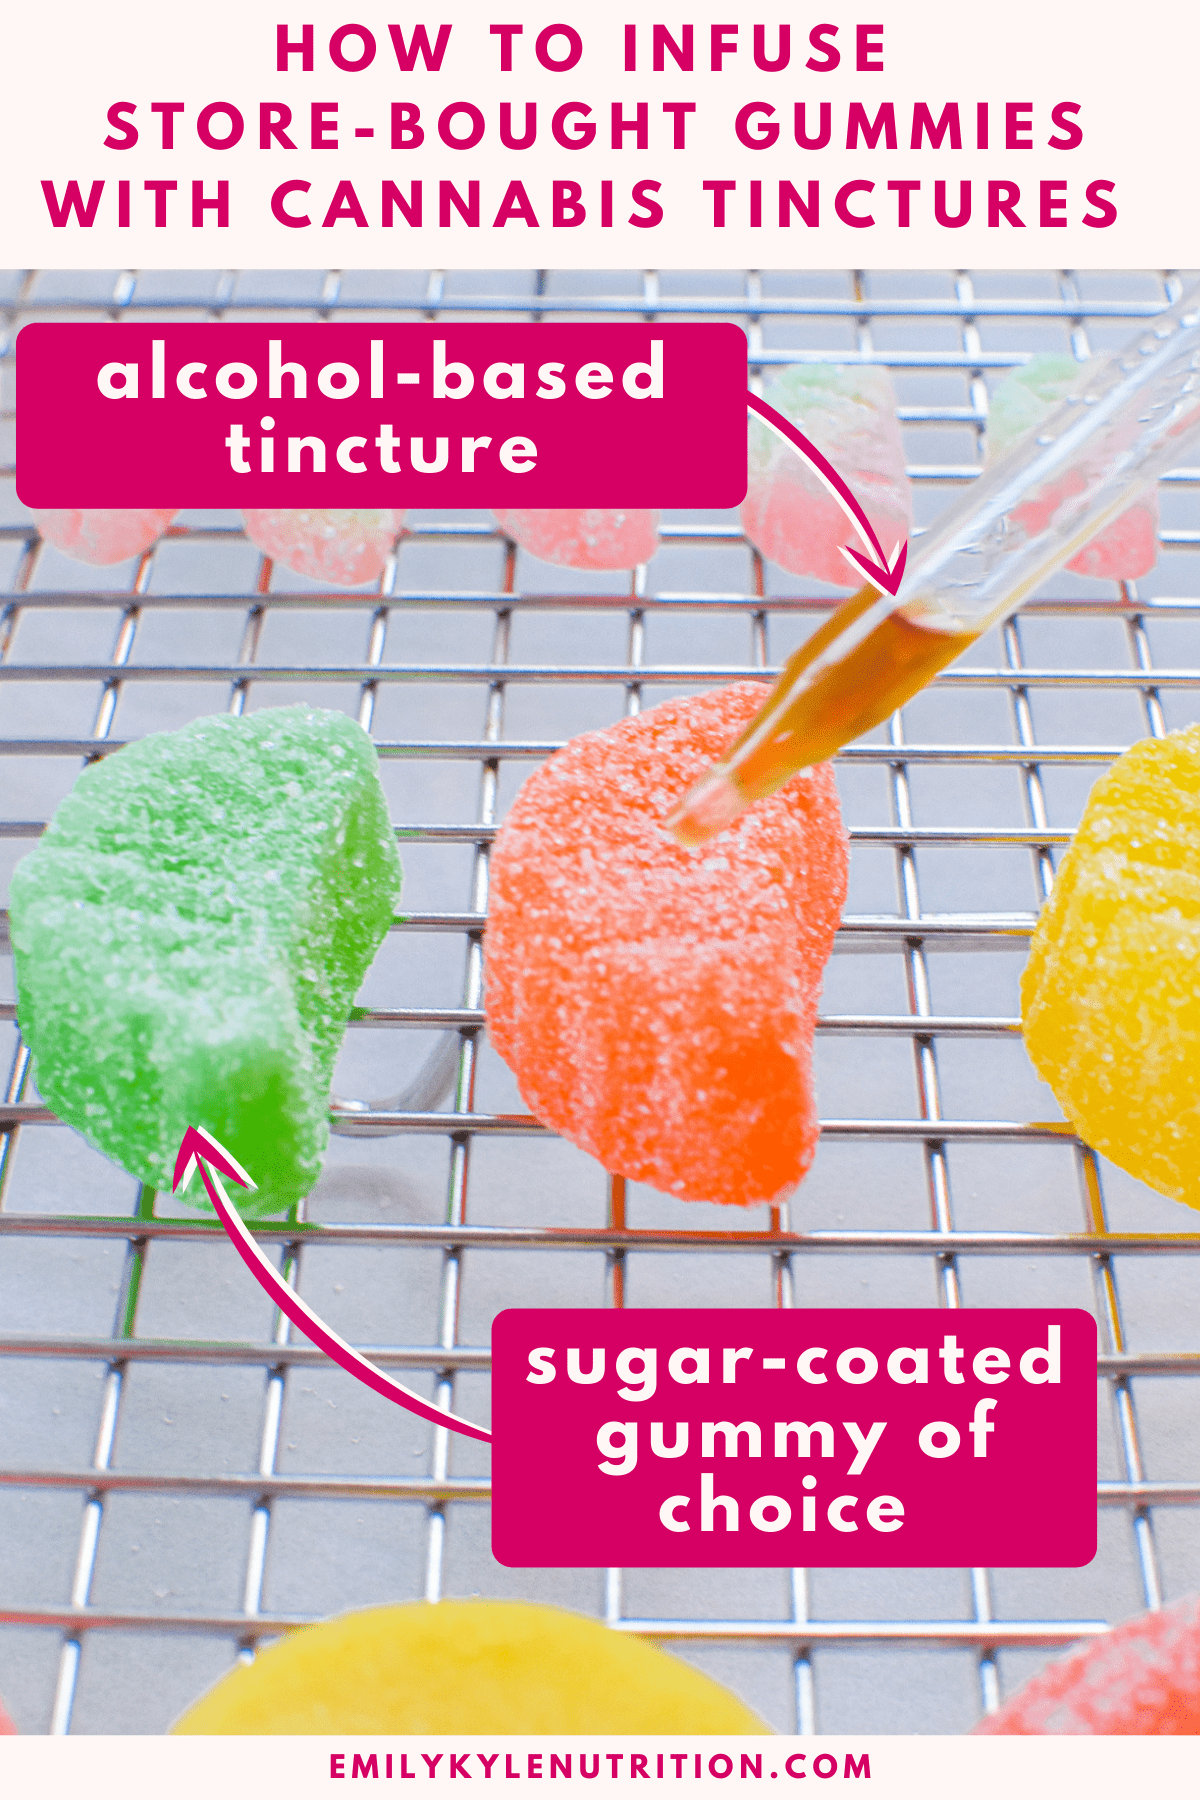 The ingredients needed to infuse store-bought gummies with cannabis tinctures including sugar coated gummies and tincture